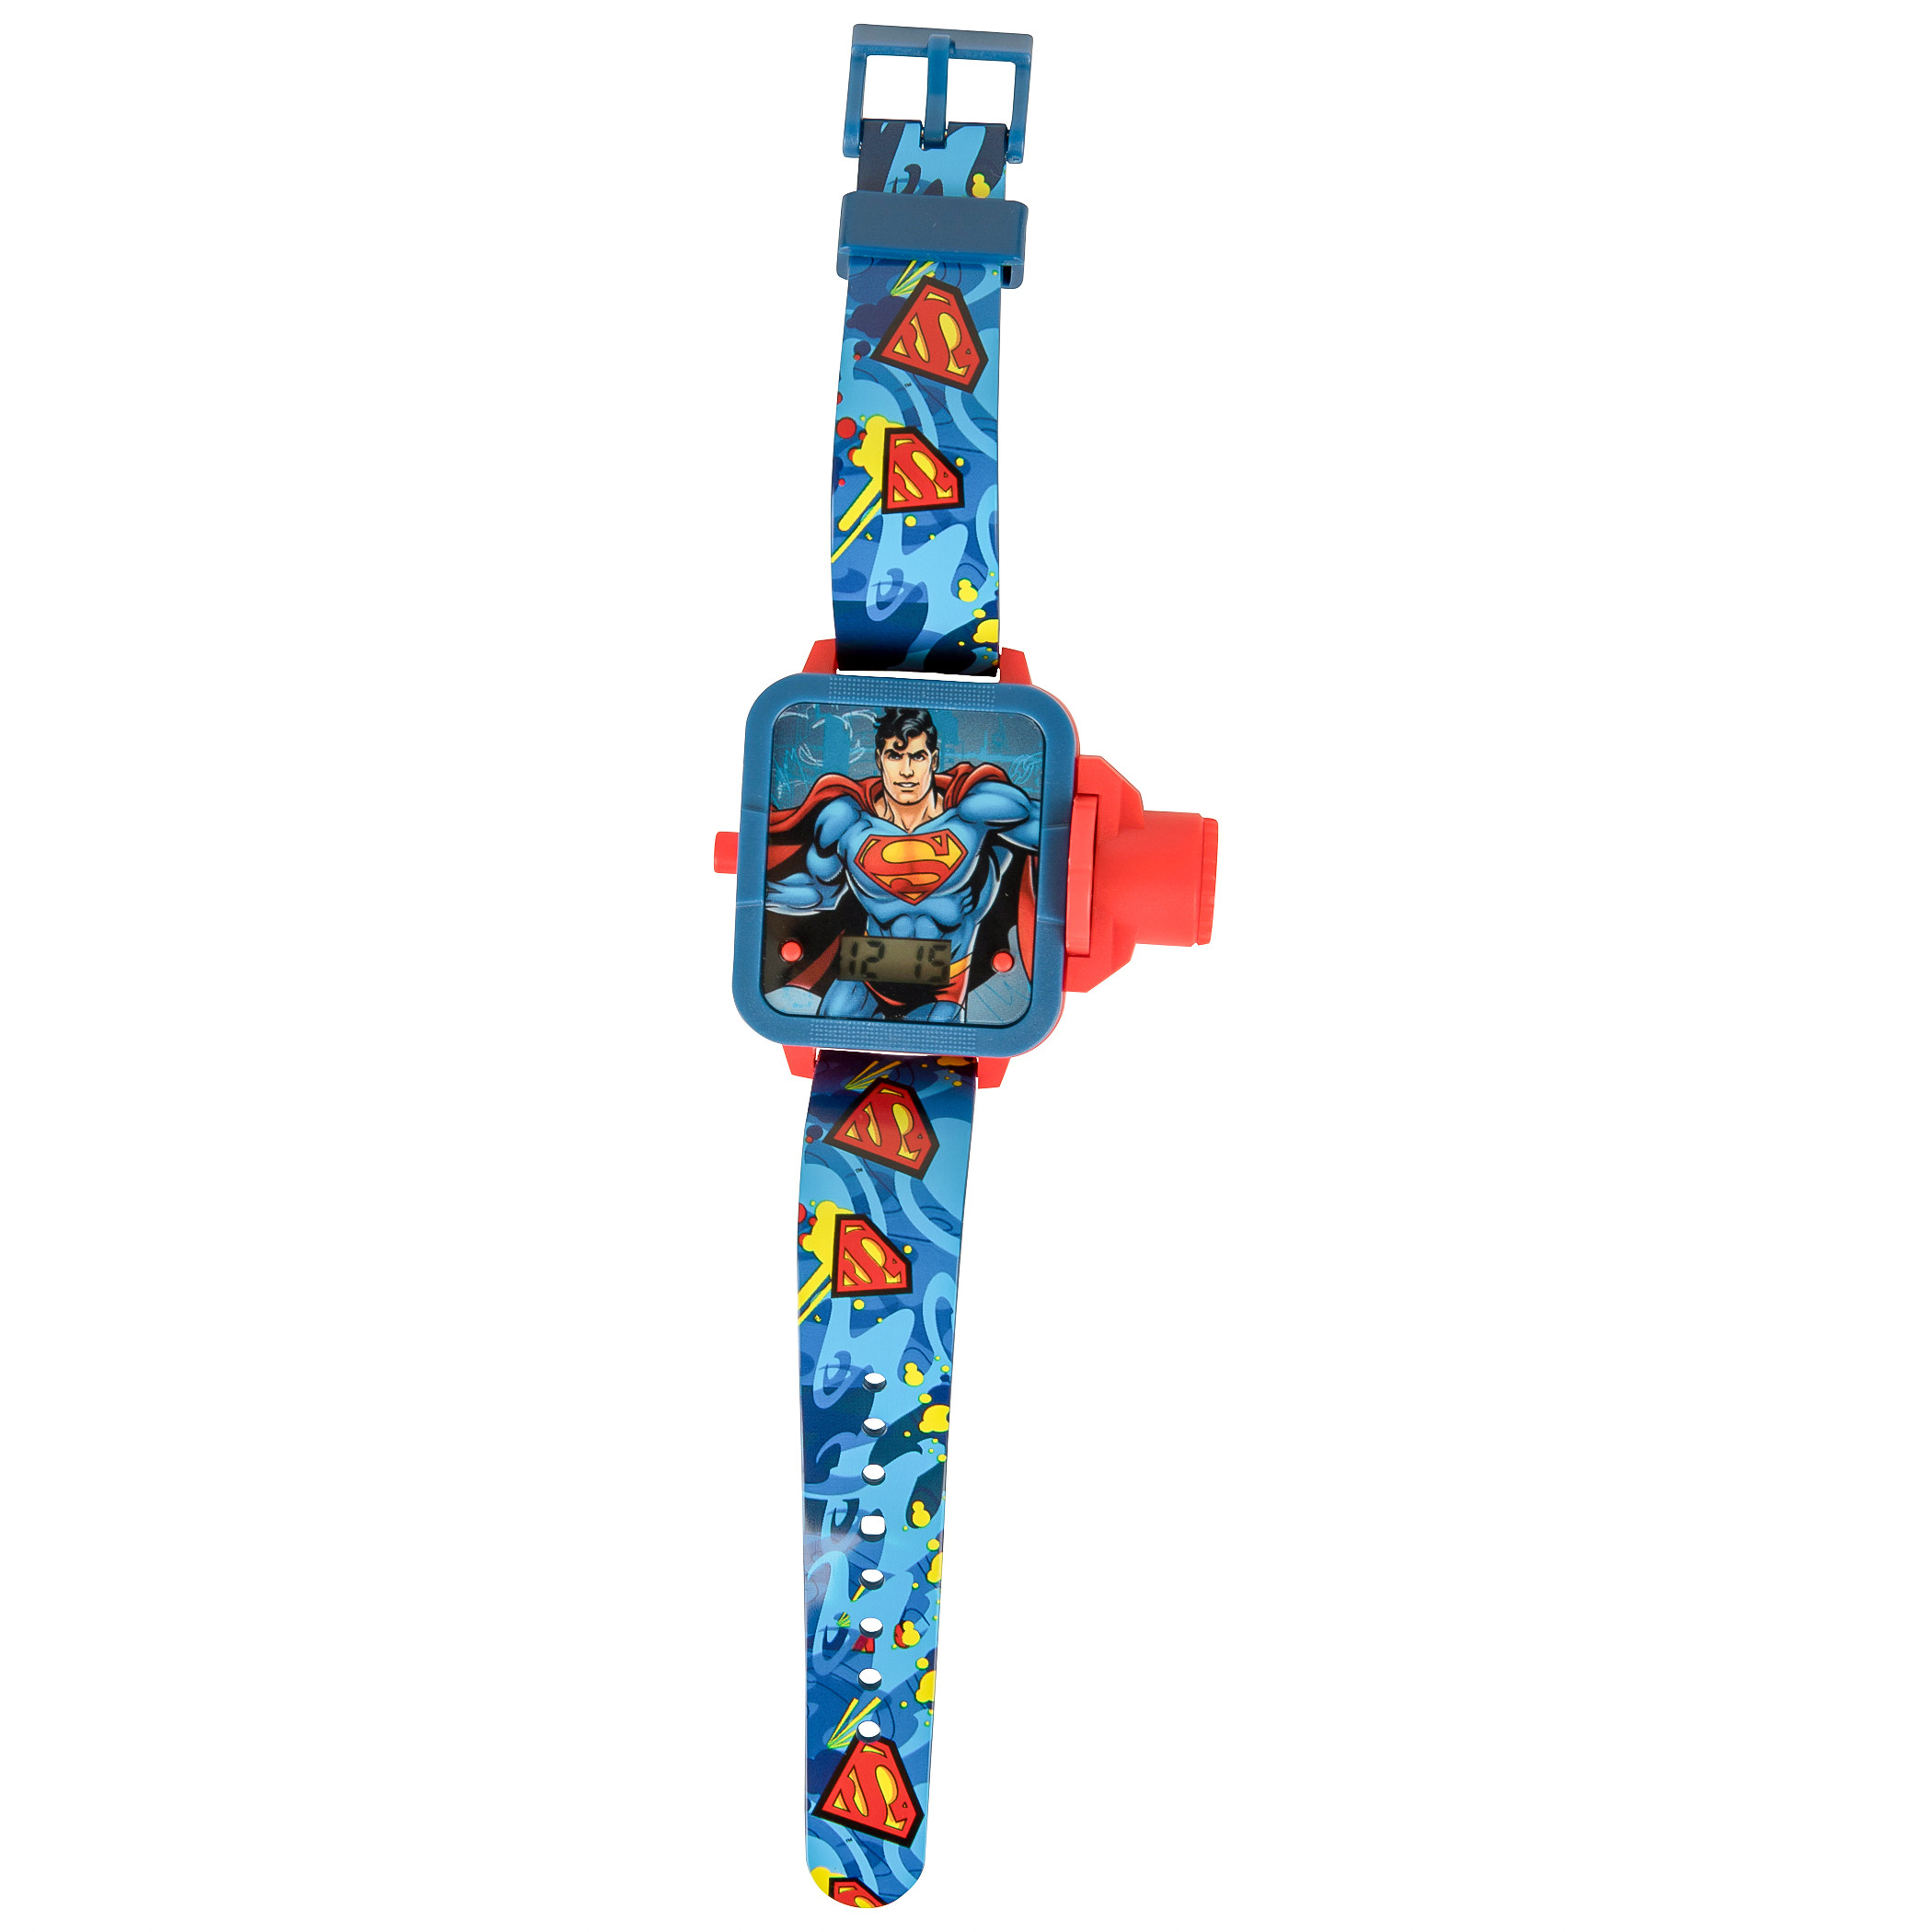 Superman Kid's Projected Images LCD Watch